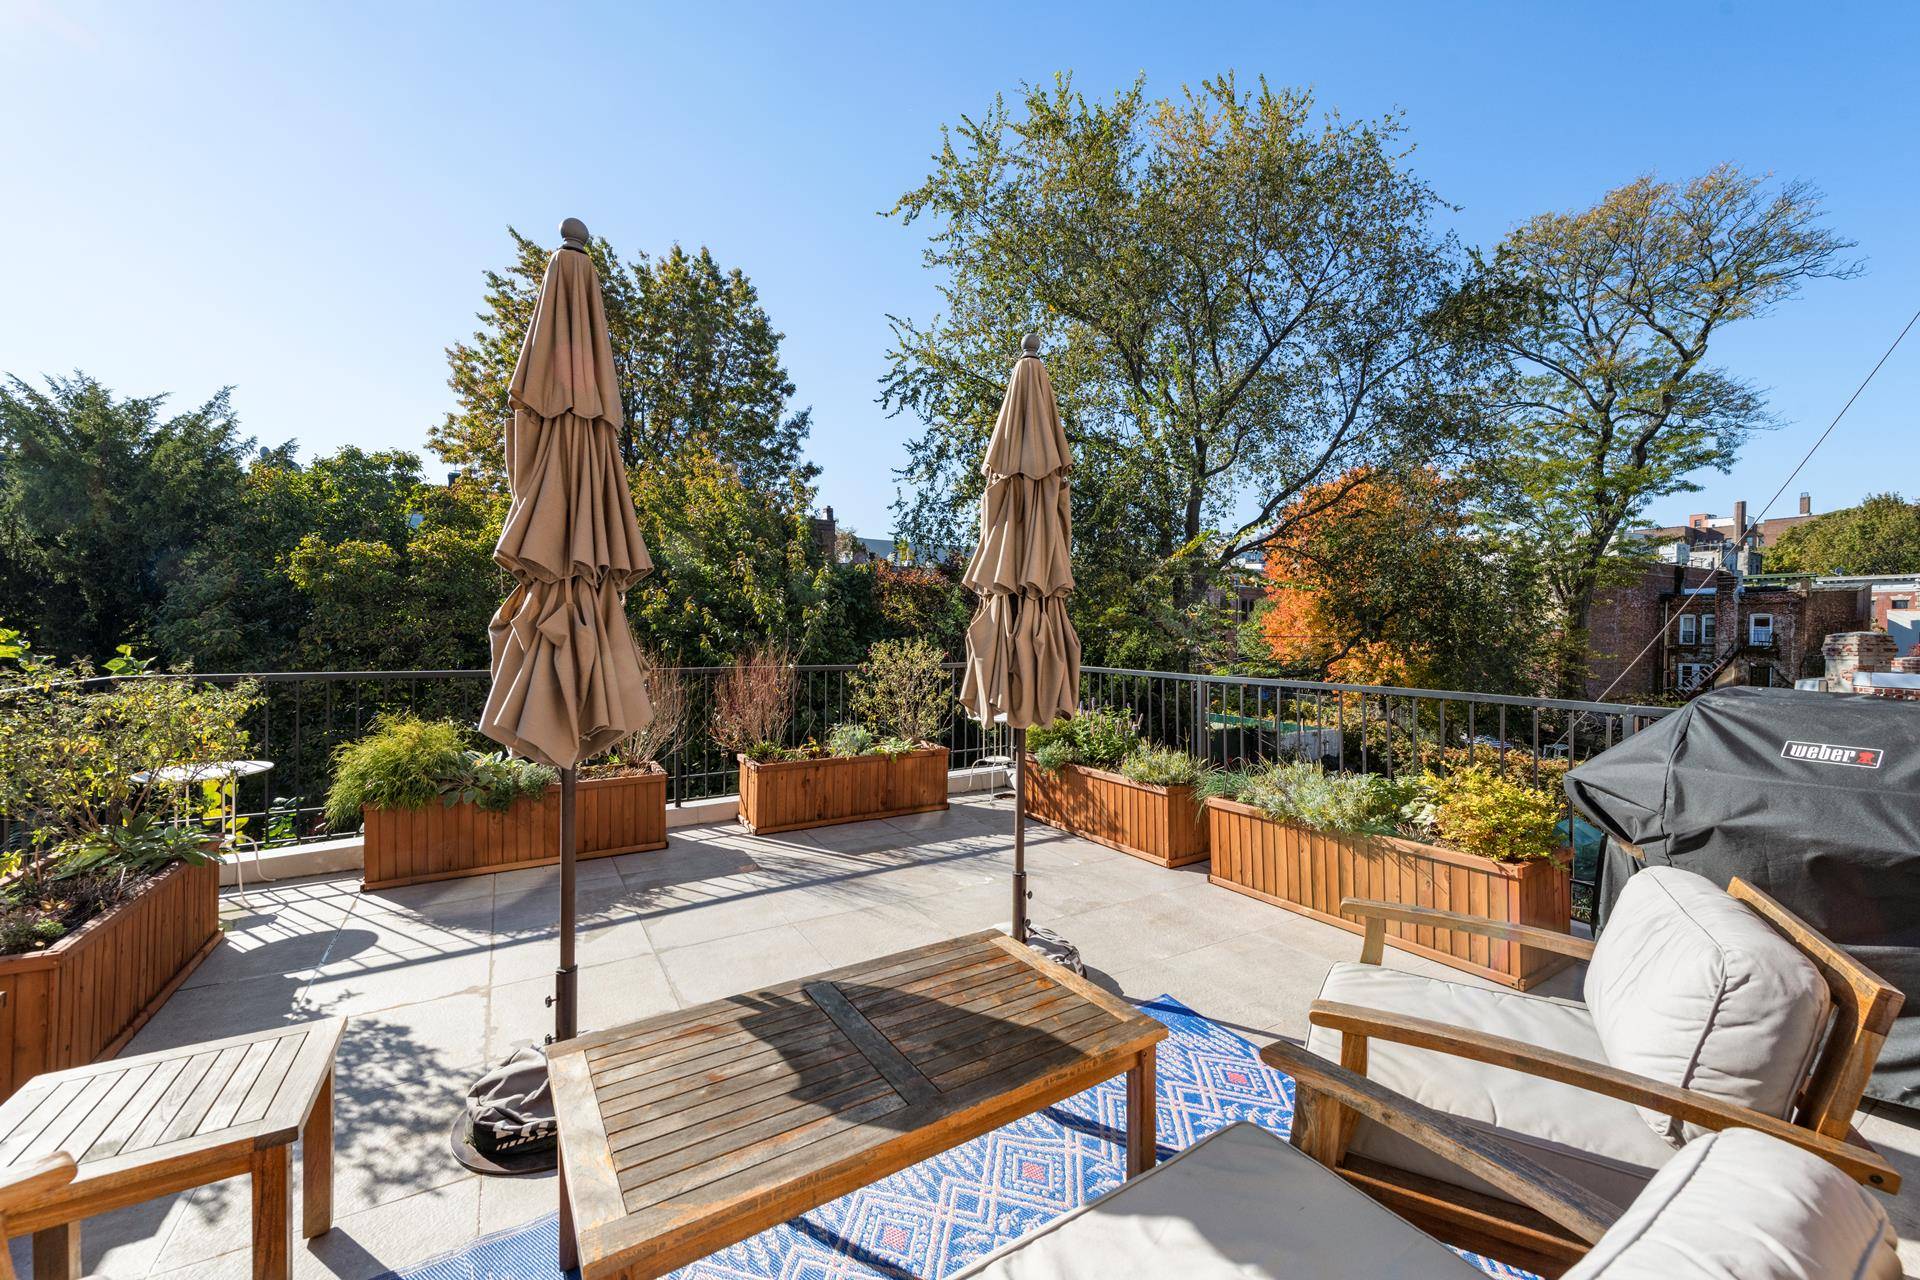 872 Saint John's Place, Apt 3 is a one of a kind private deck, 2 bedroom, 2 bath with washer dryer in a newly remodeled brownstone on a beautiful tree ...